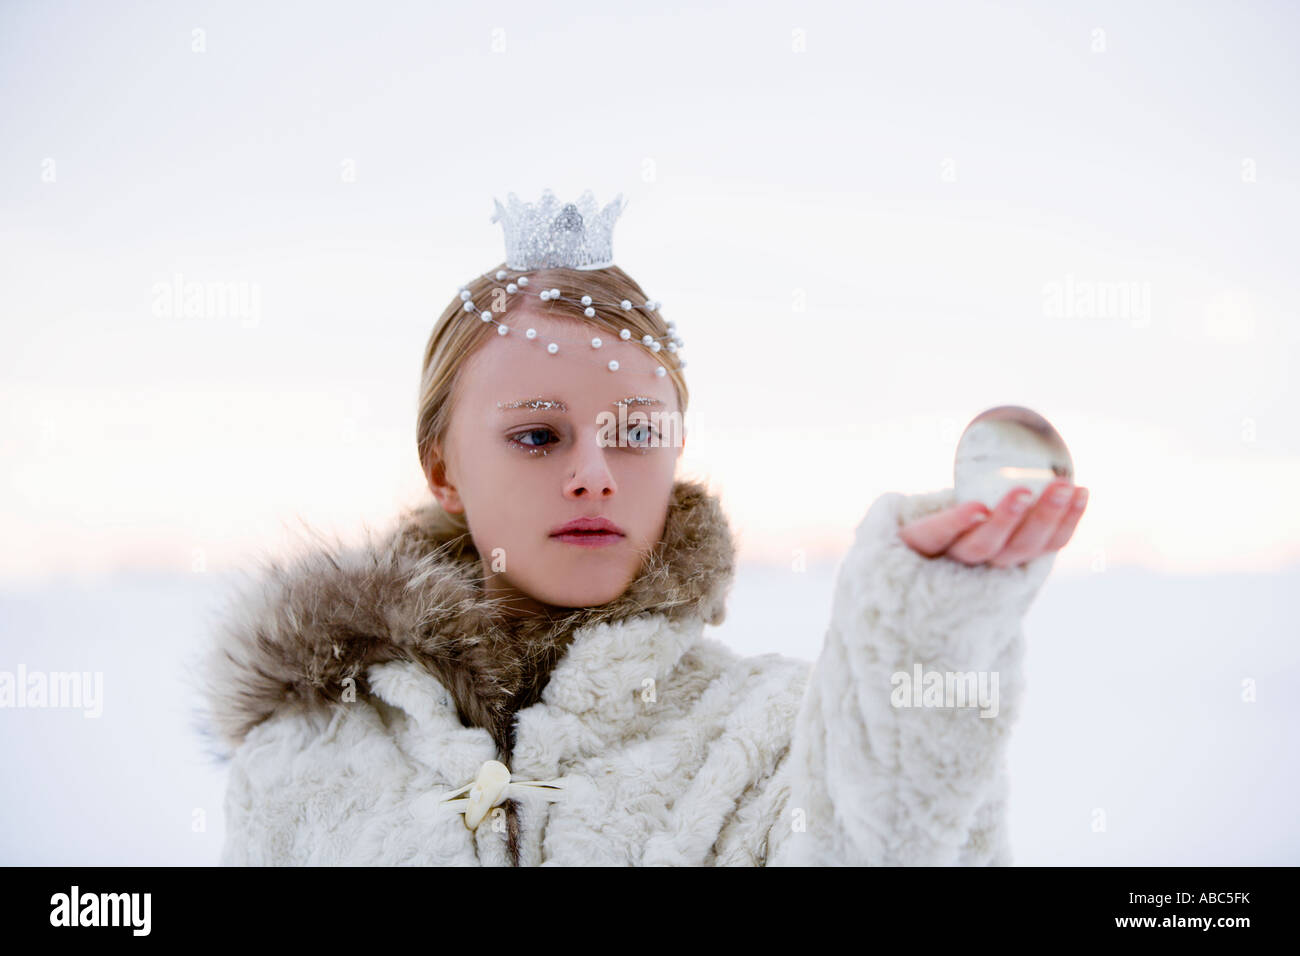 portrait of snow queen holding crystal ball Stock Photo